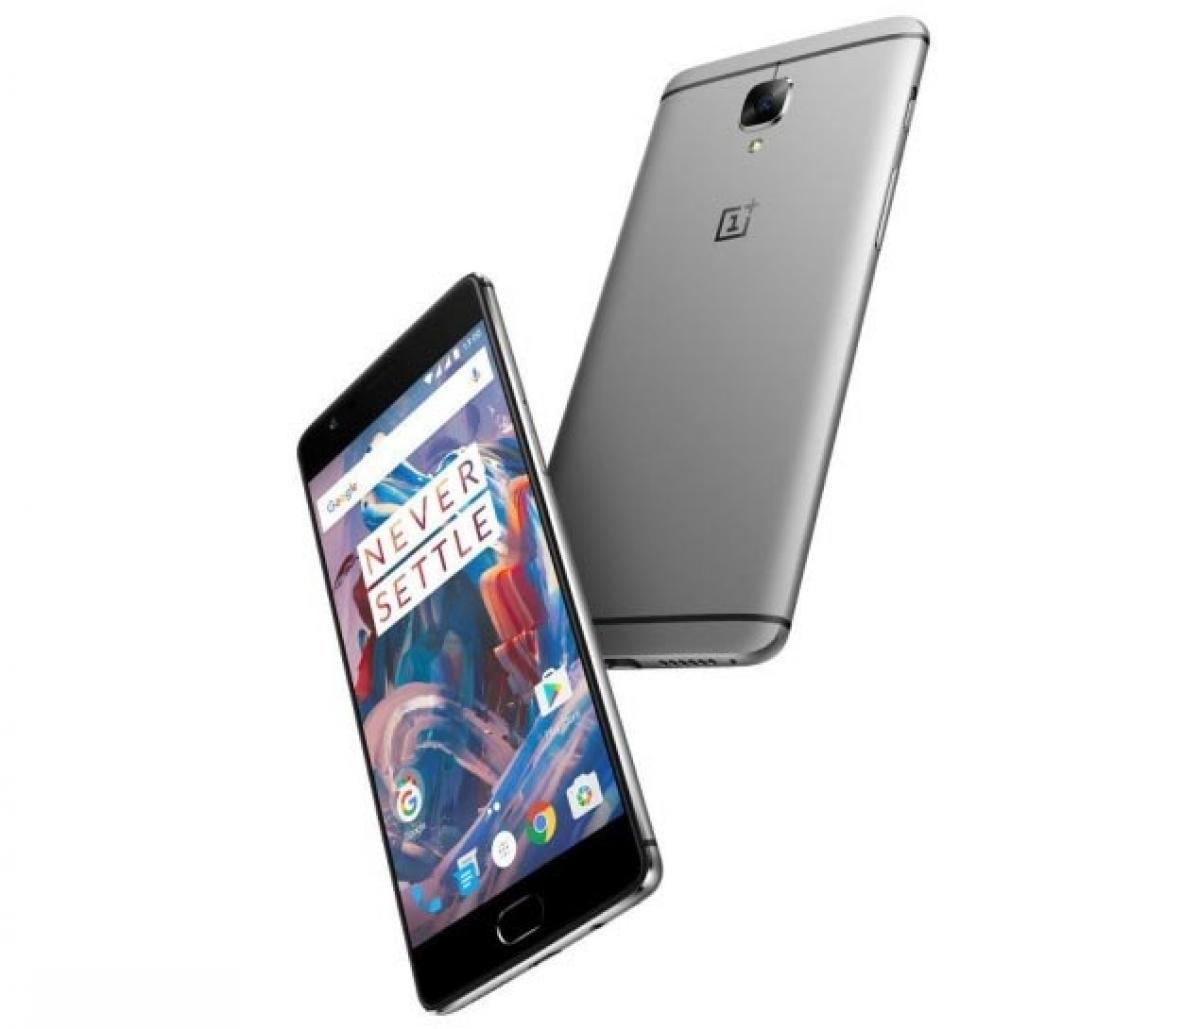 Check out new OnePlus 3 with Snapdragon 820 processor 6GB RAM launched